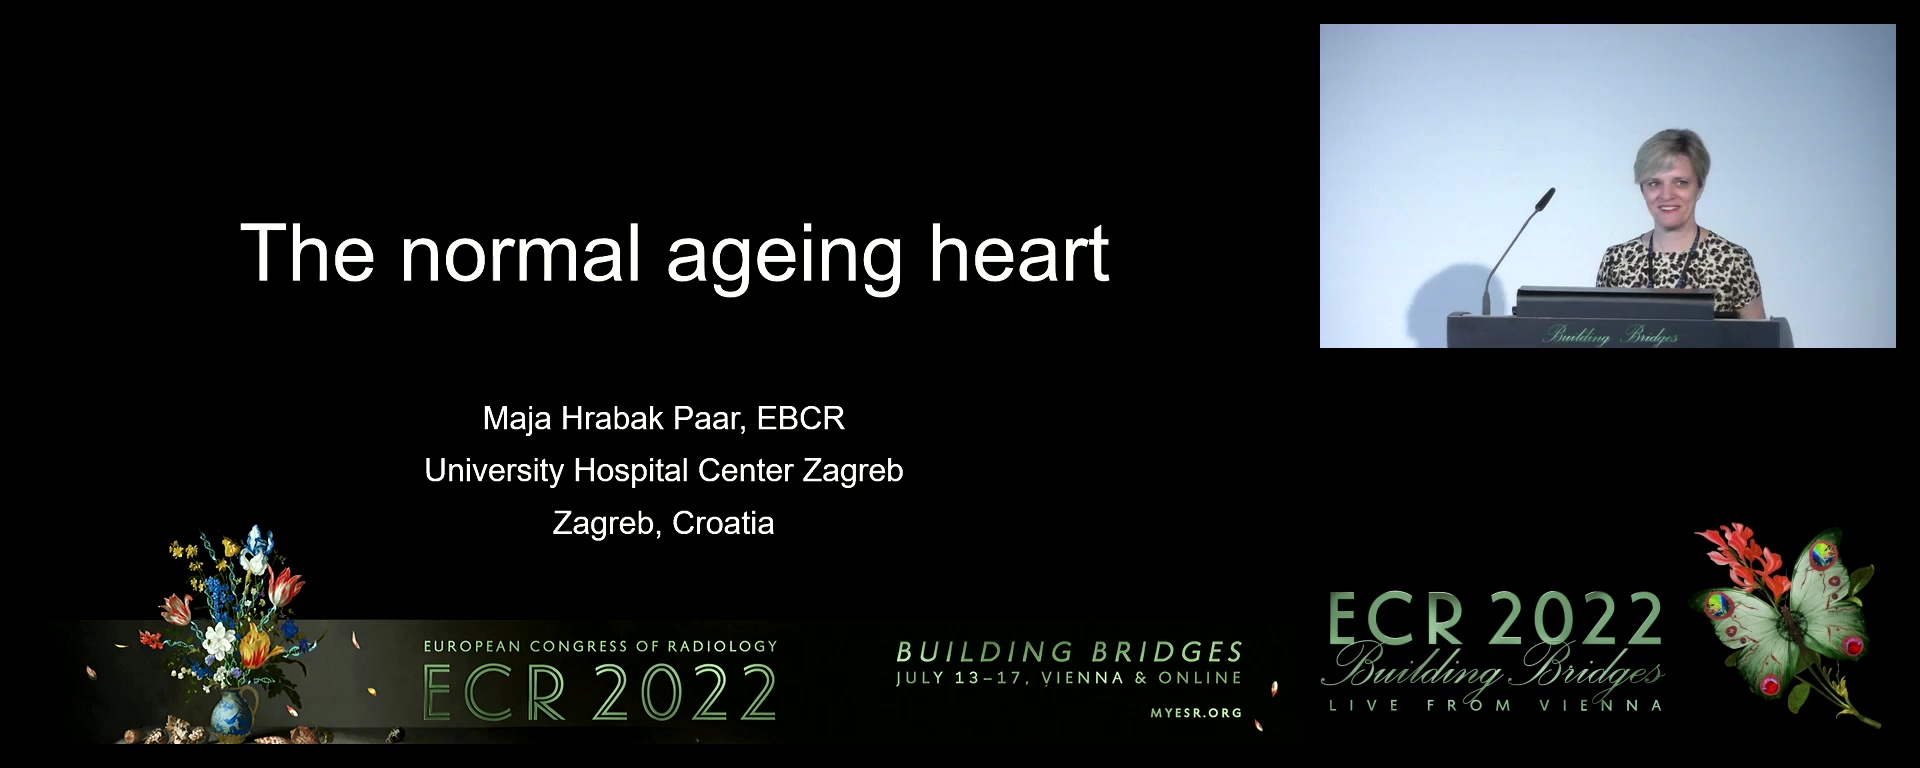 The normal ageing heart